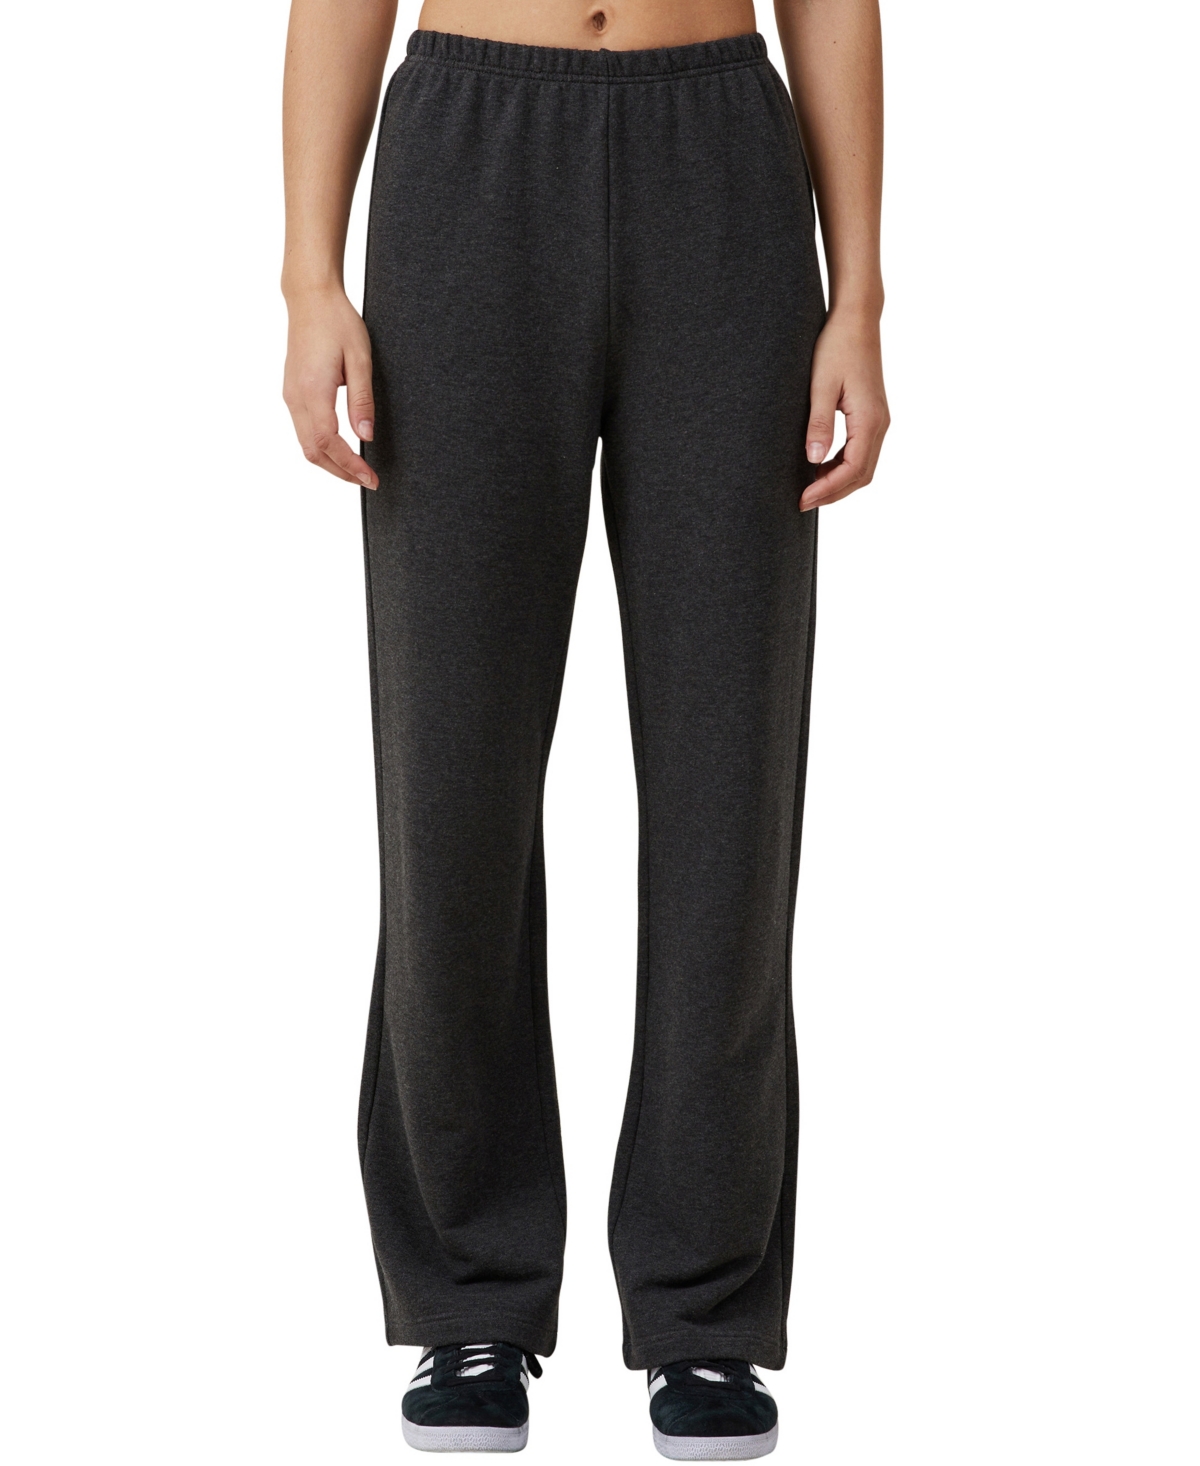 Women's Light Weight Straight Sweatpants - Charcoal Marle